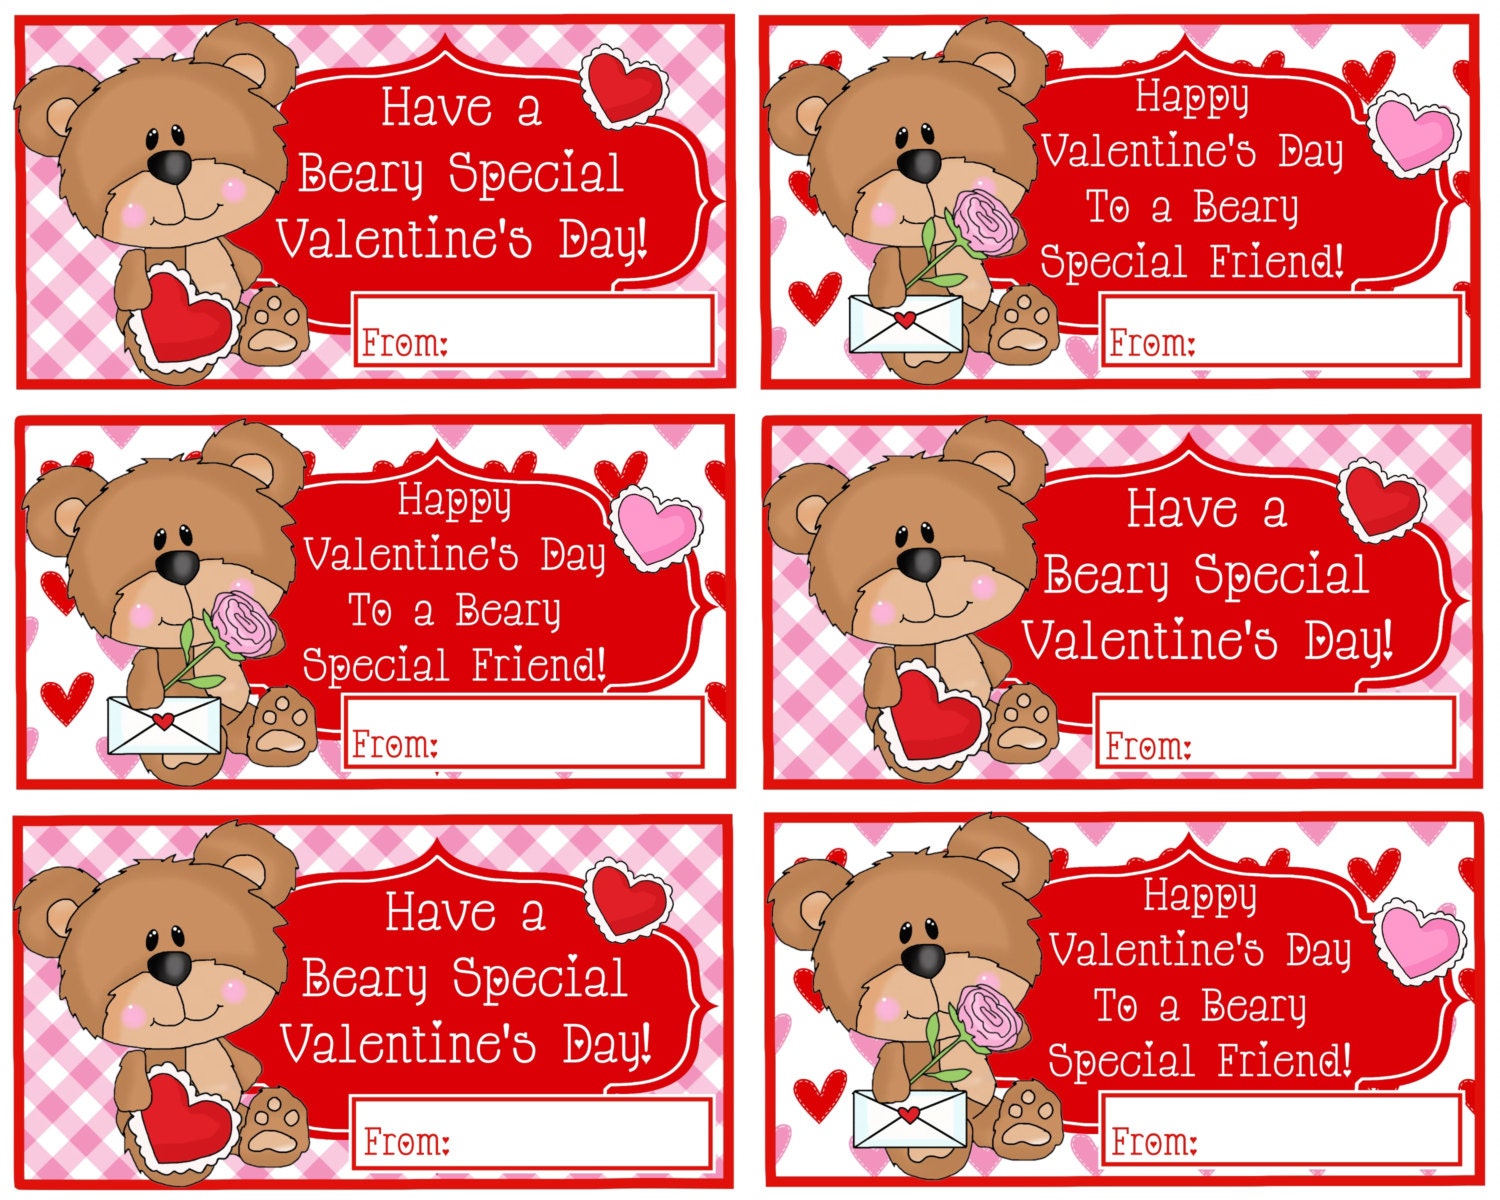 Printable Beary Special Valentine Cards Beary Special